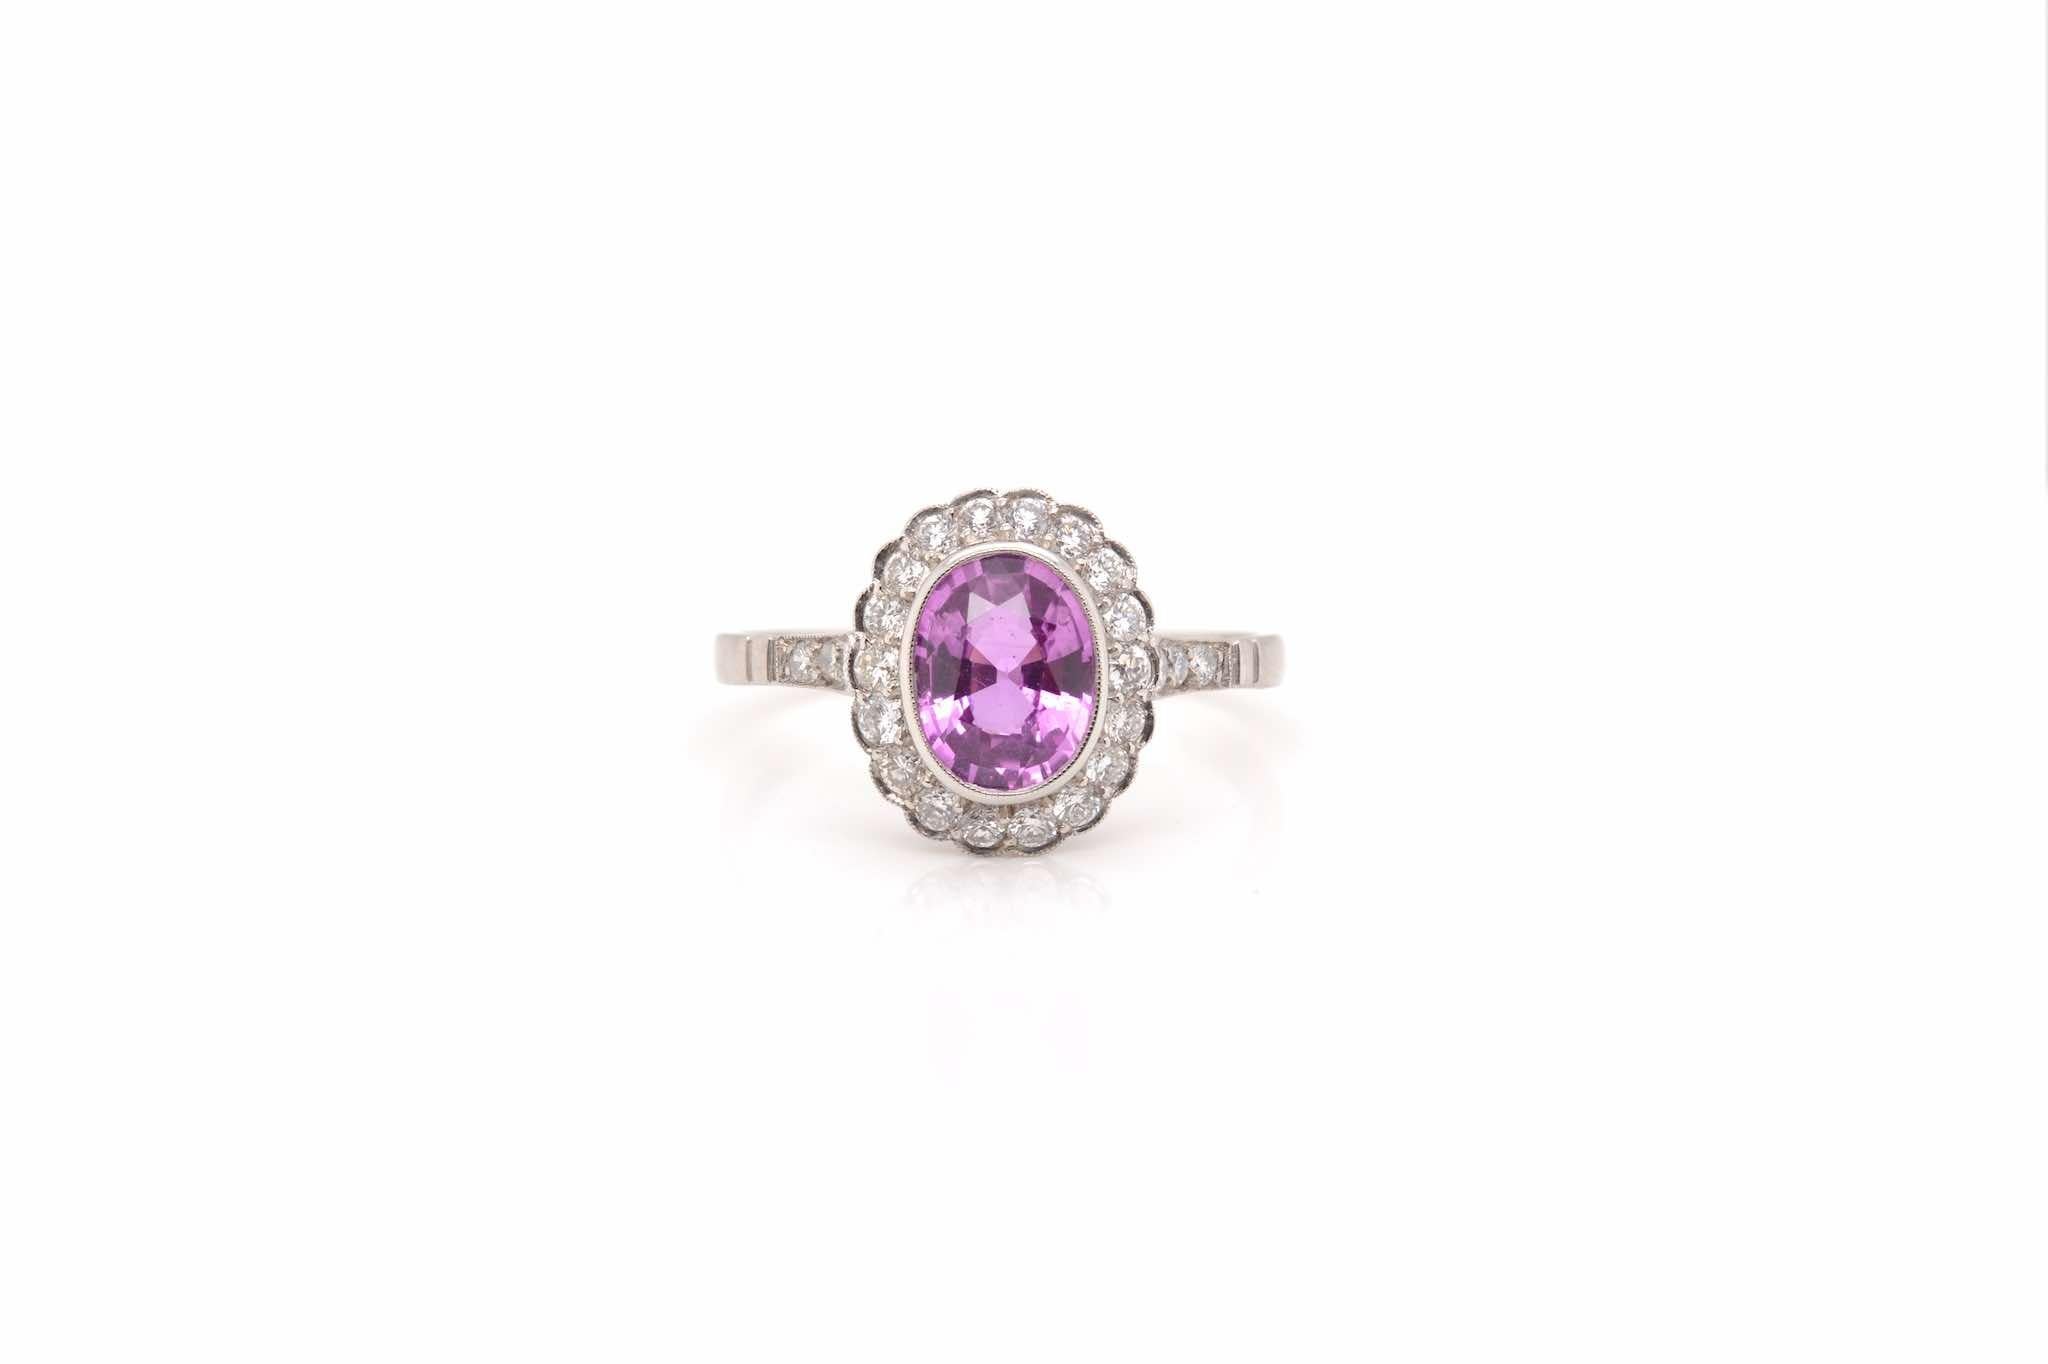 Stones: 1.20 carats pink sapphire
and diamonds for a total weight of 0.25 carats.
Material: Platinum
Dimensions: 12 mm length on finger
Weight: 3.4g
Size: 55 (free sizing)
Certificate
Ref. : 24085